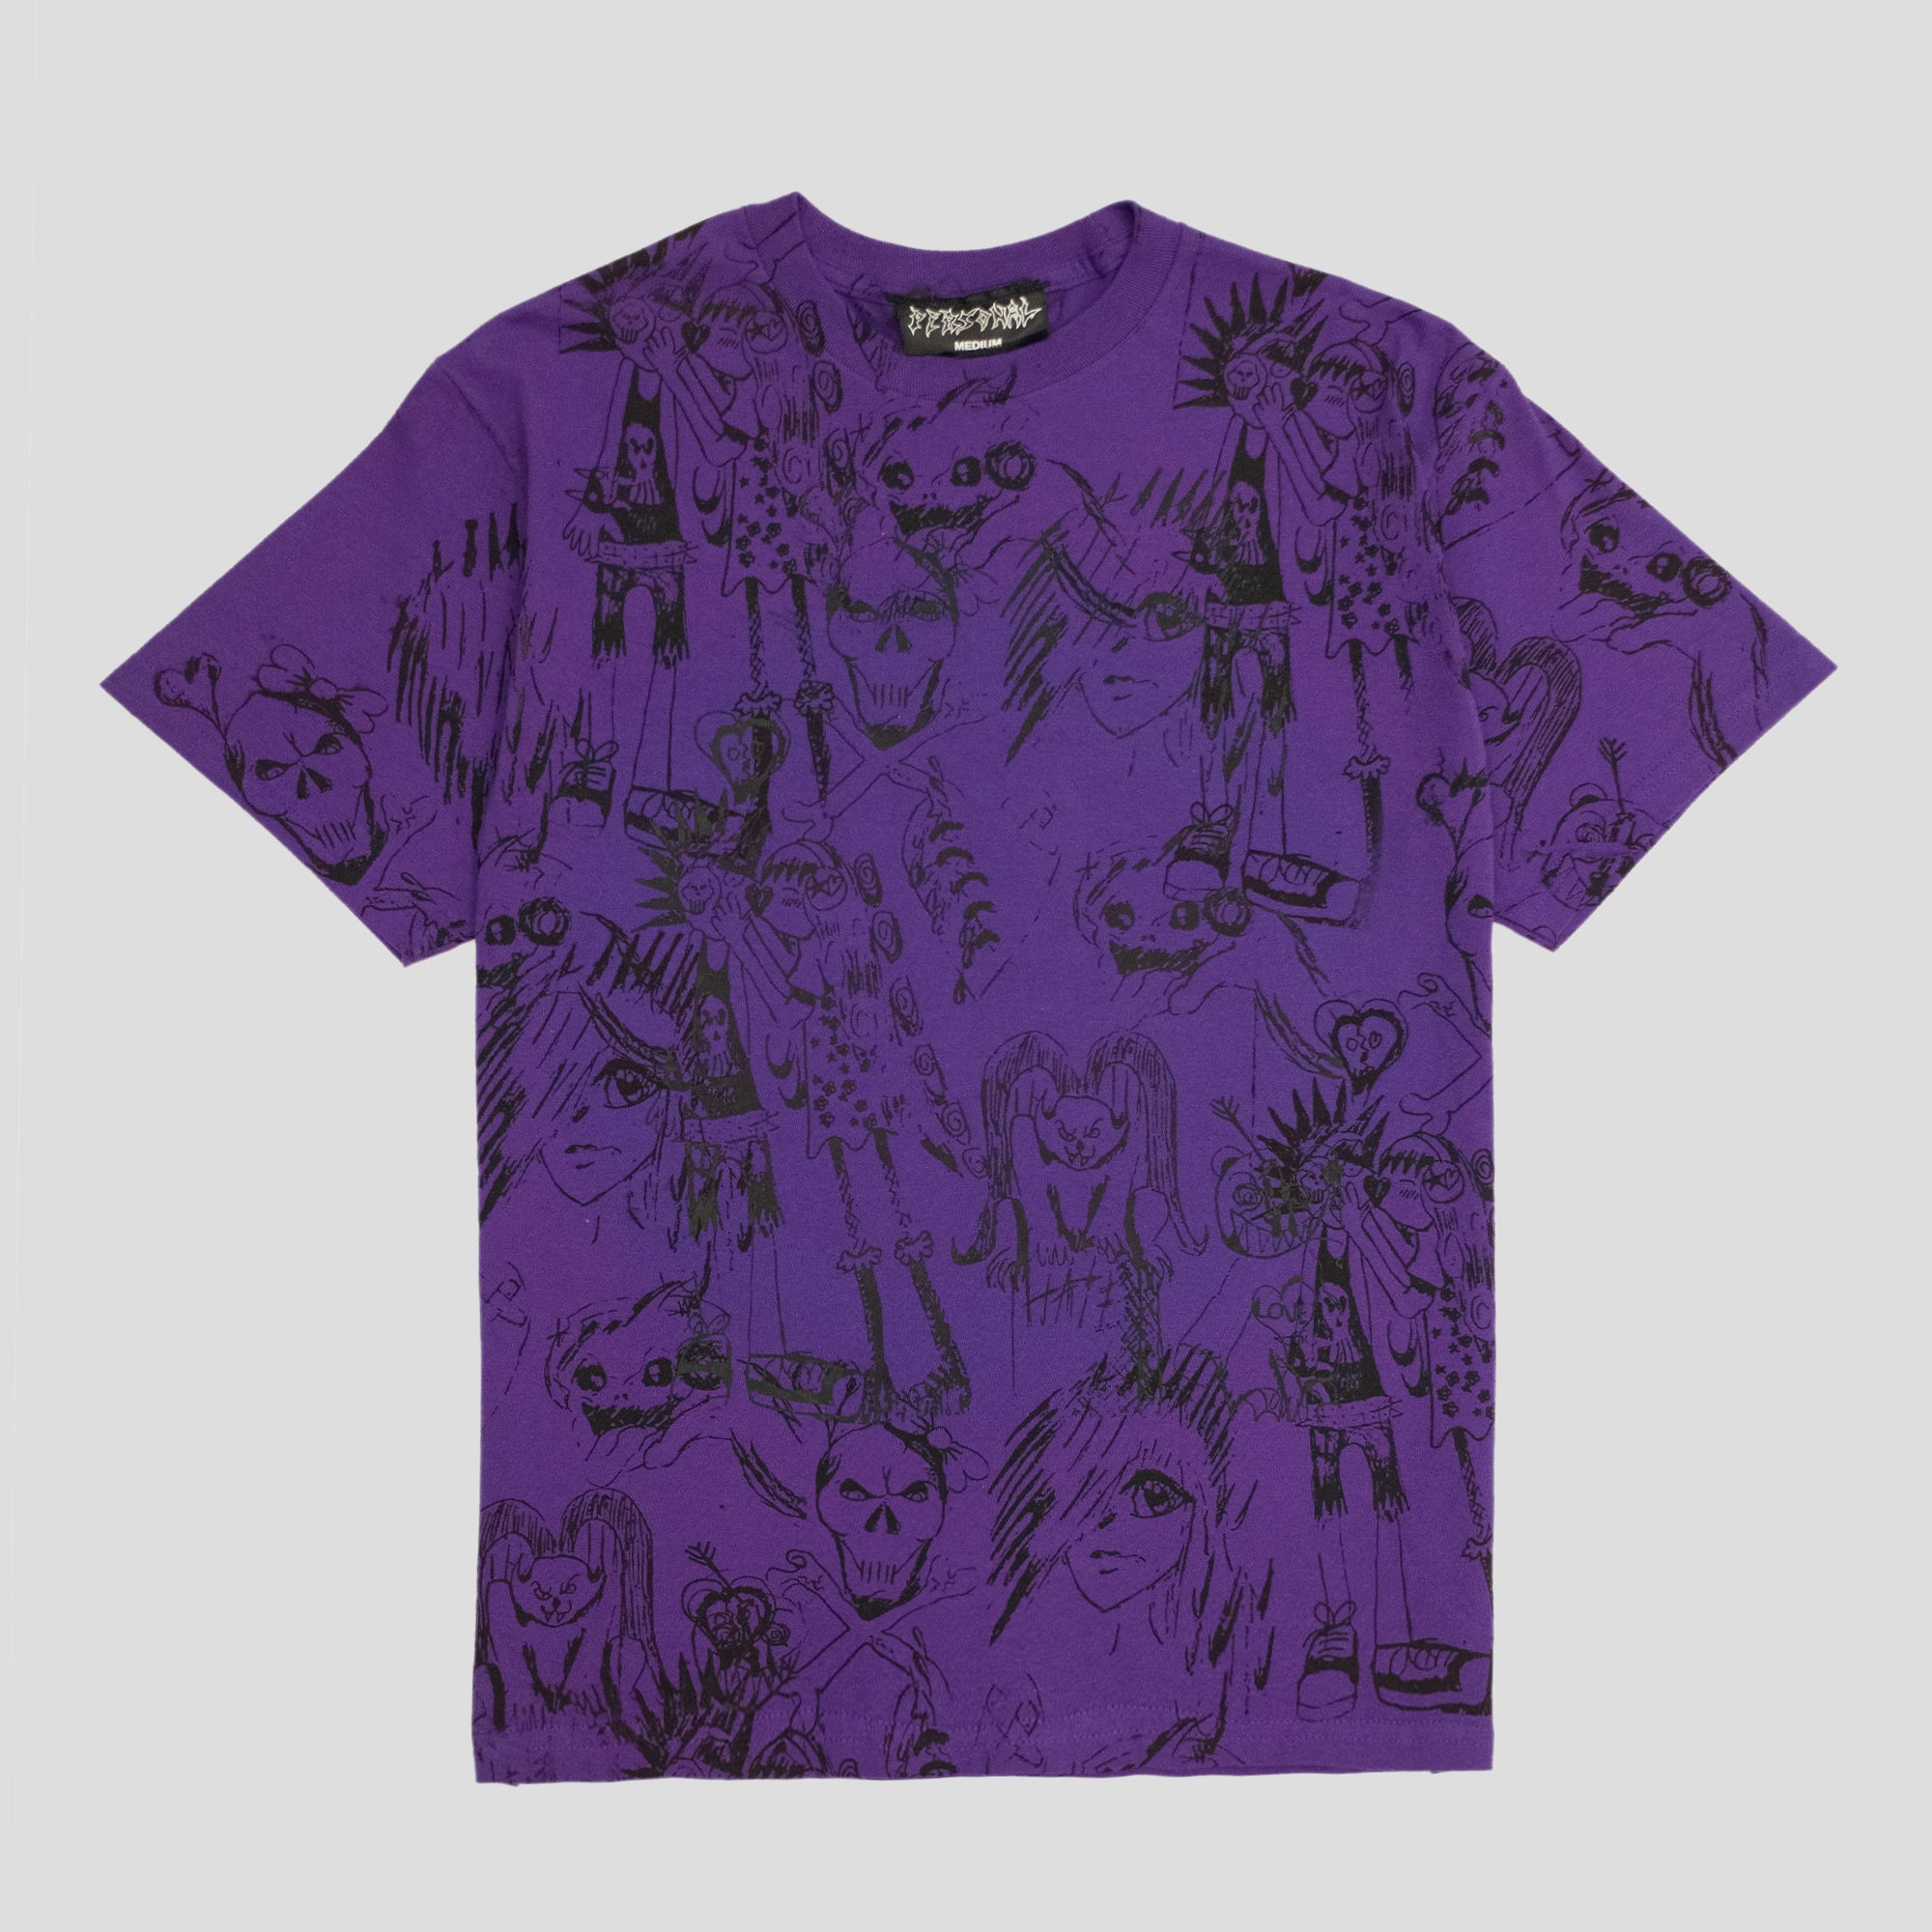 PERSONAL "ALL OVER" TEE PURPLE